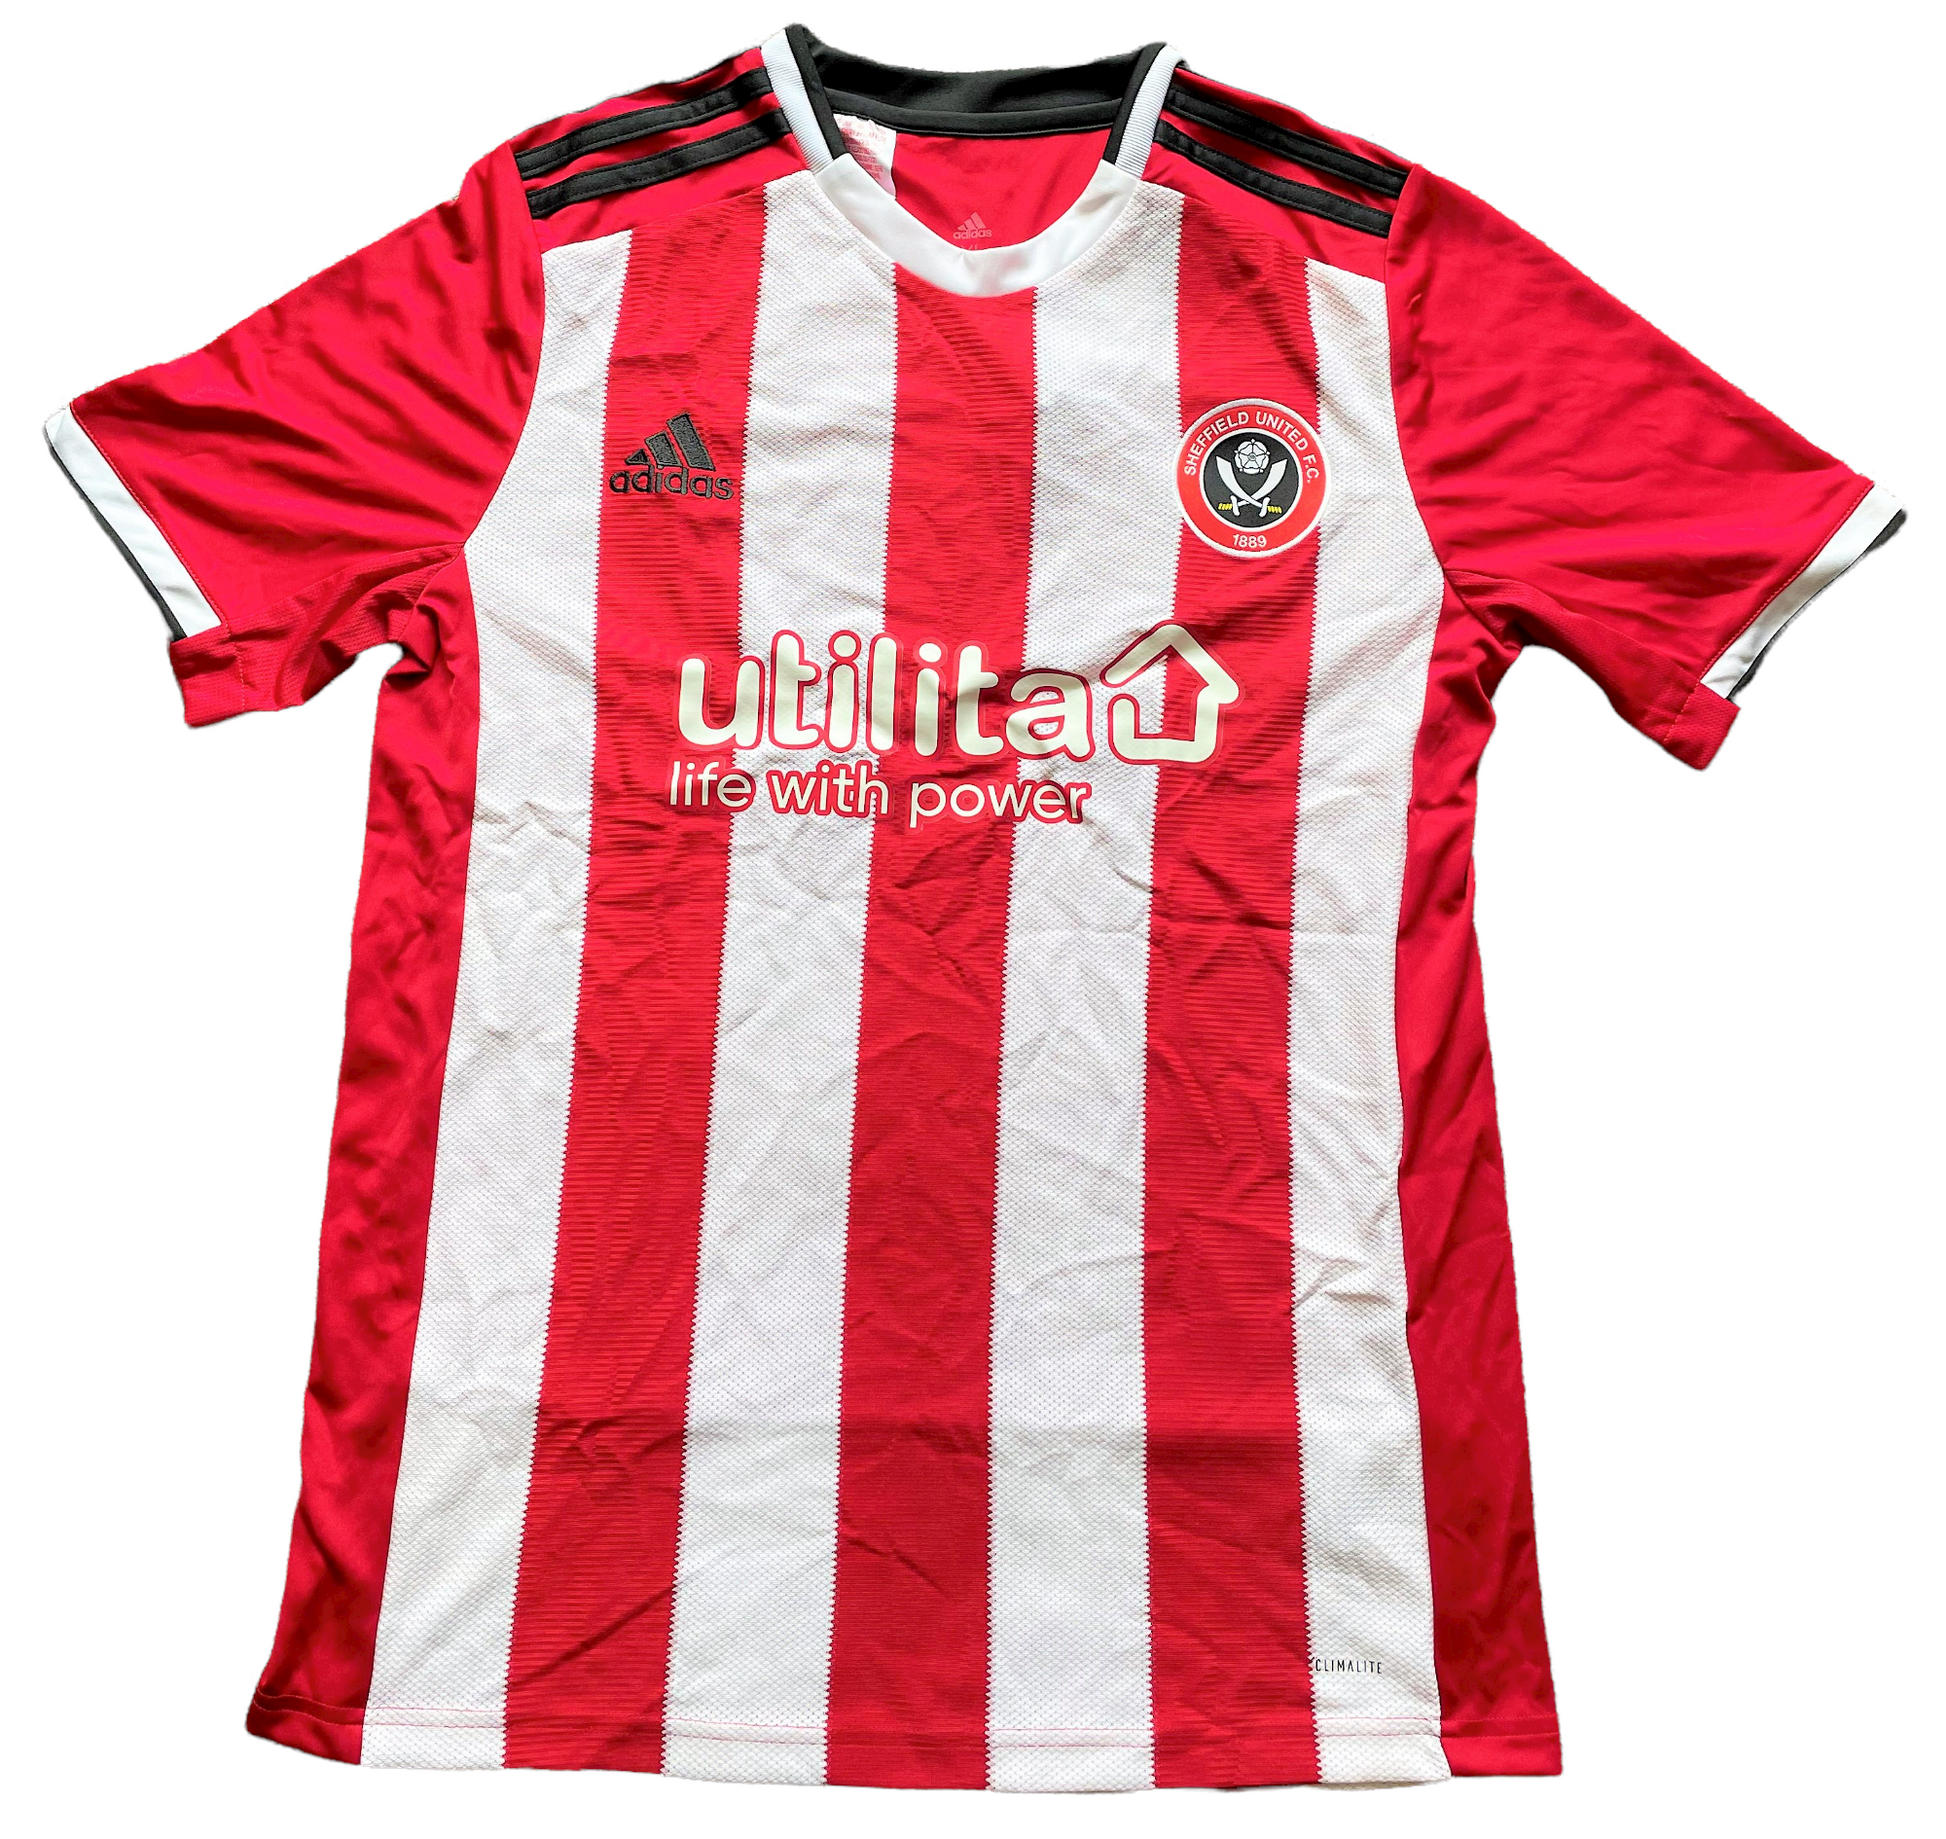 2019-20 Sheffield United Home Shirt (excellent) Youths 15 to 16 years